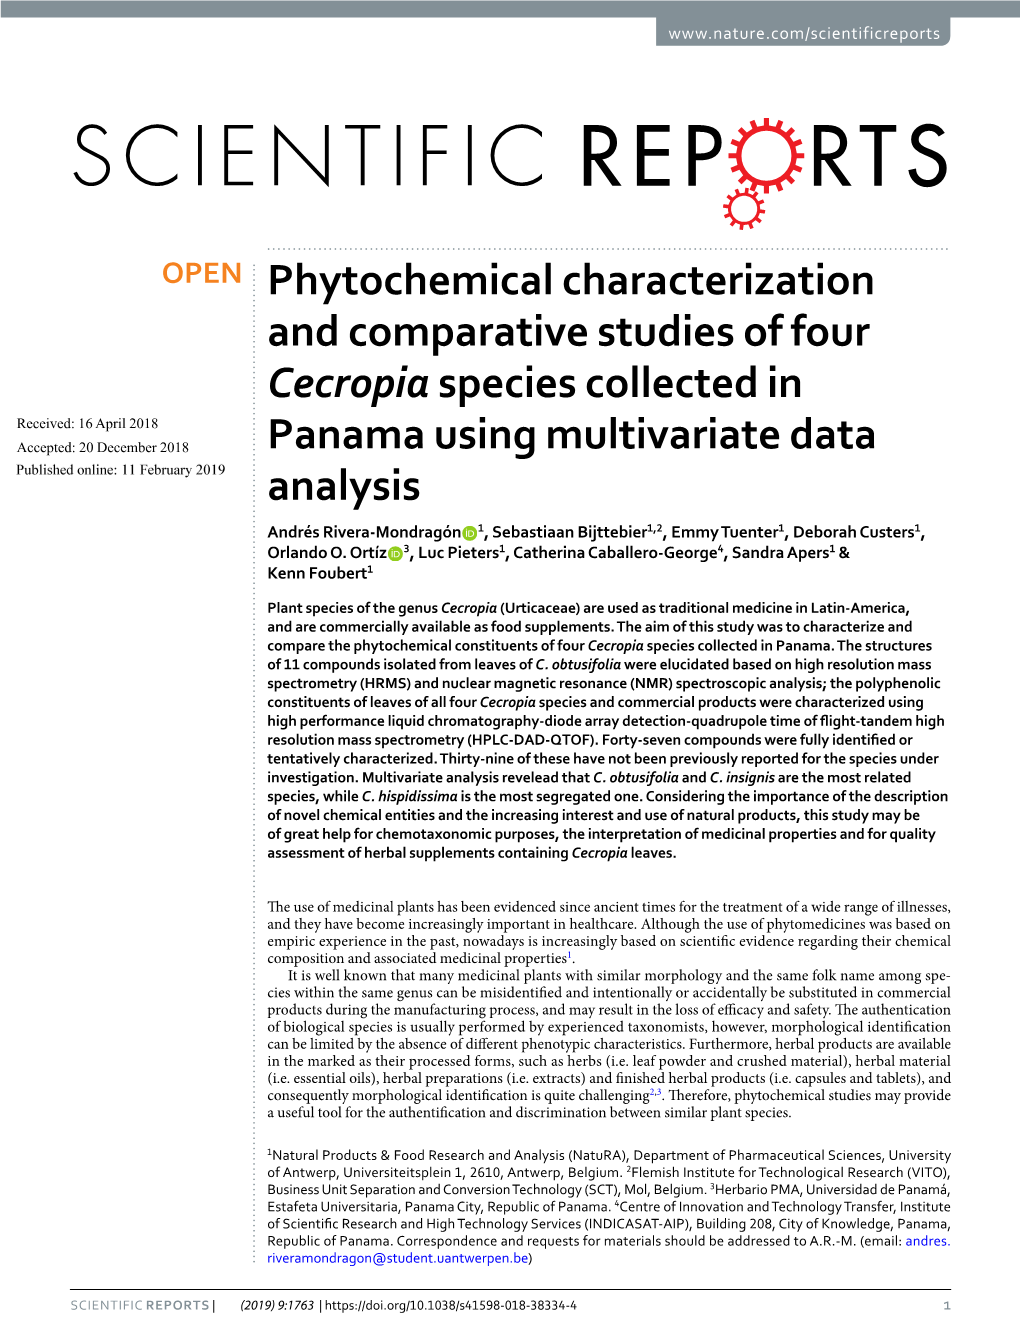 Phytochemical Characterization and Comparative Studies of Four